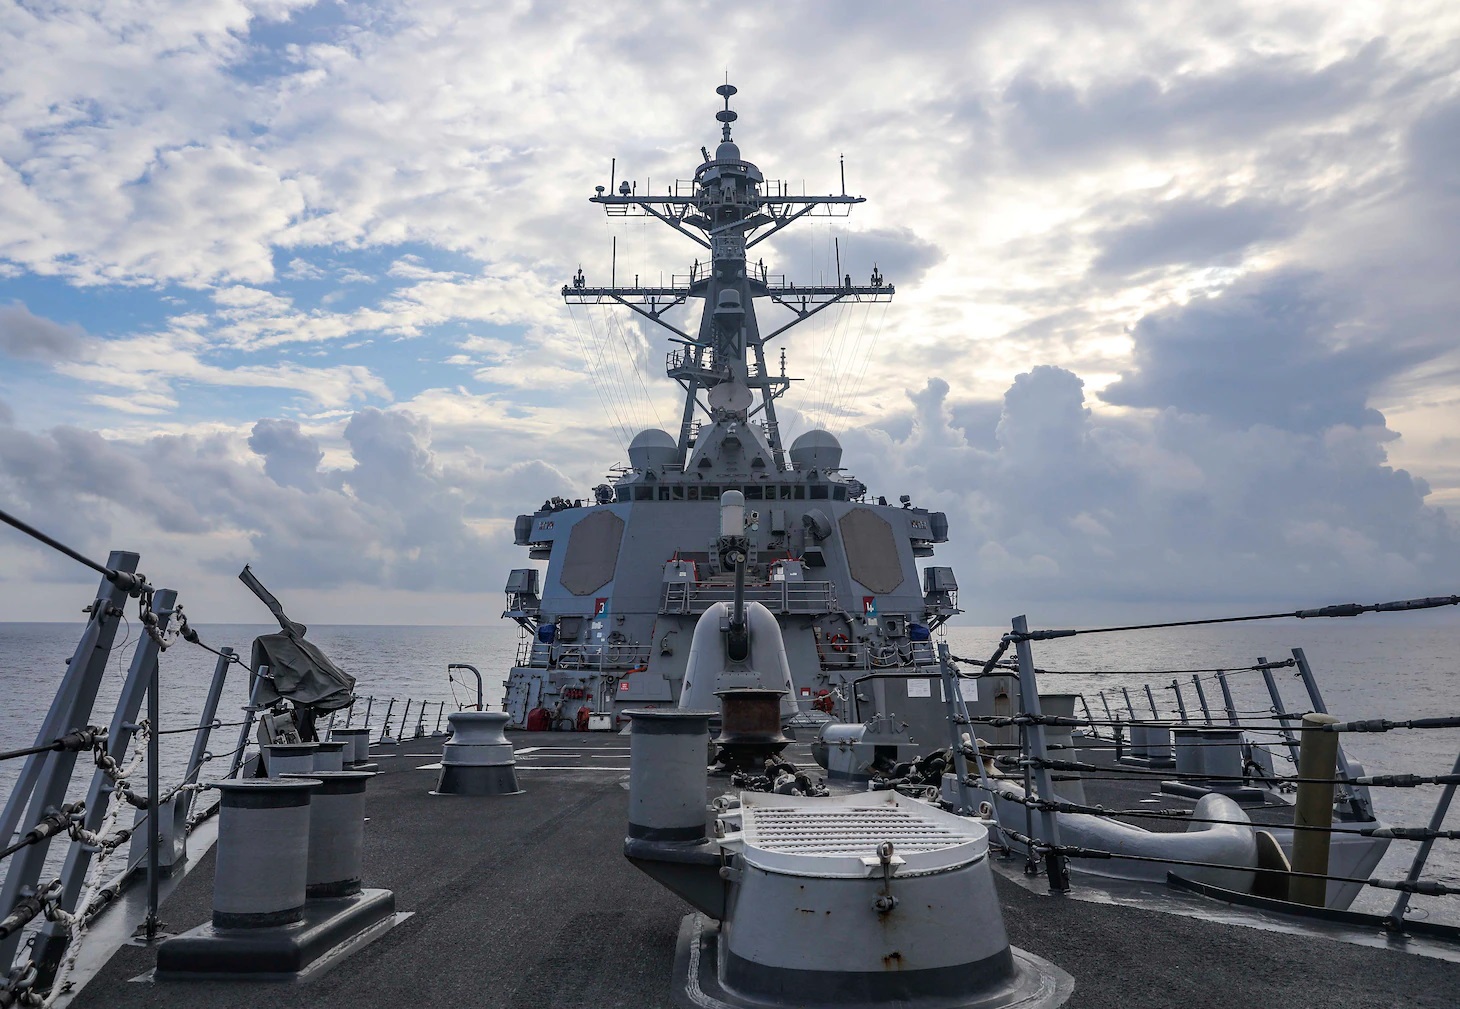 The Arleigh Burke-class guided-missile destroyer USS Benfold (DDG 65) sails through the South China Sea while conducting routine underway operations.